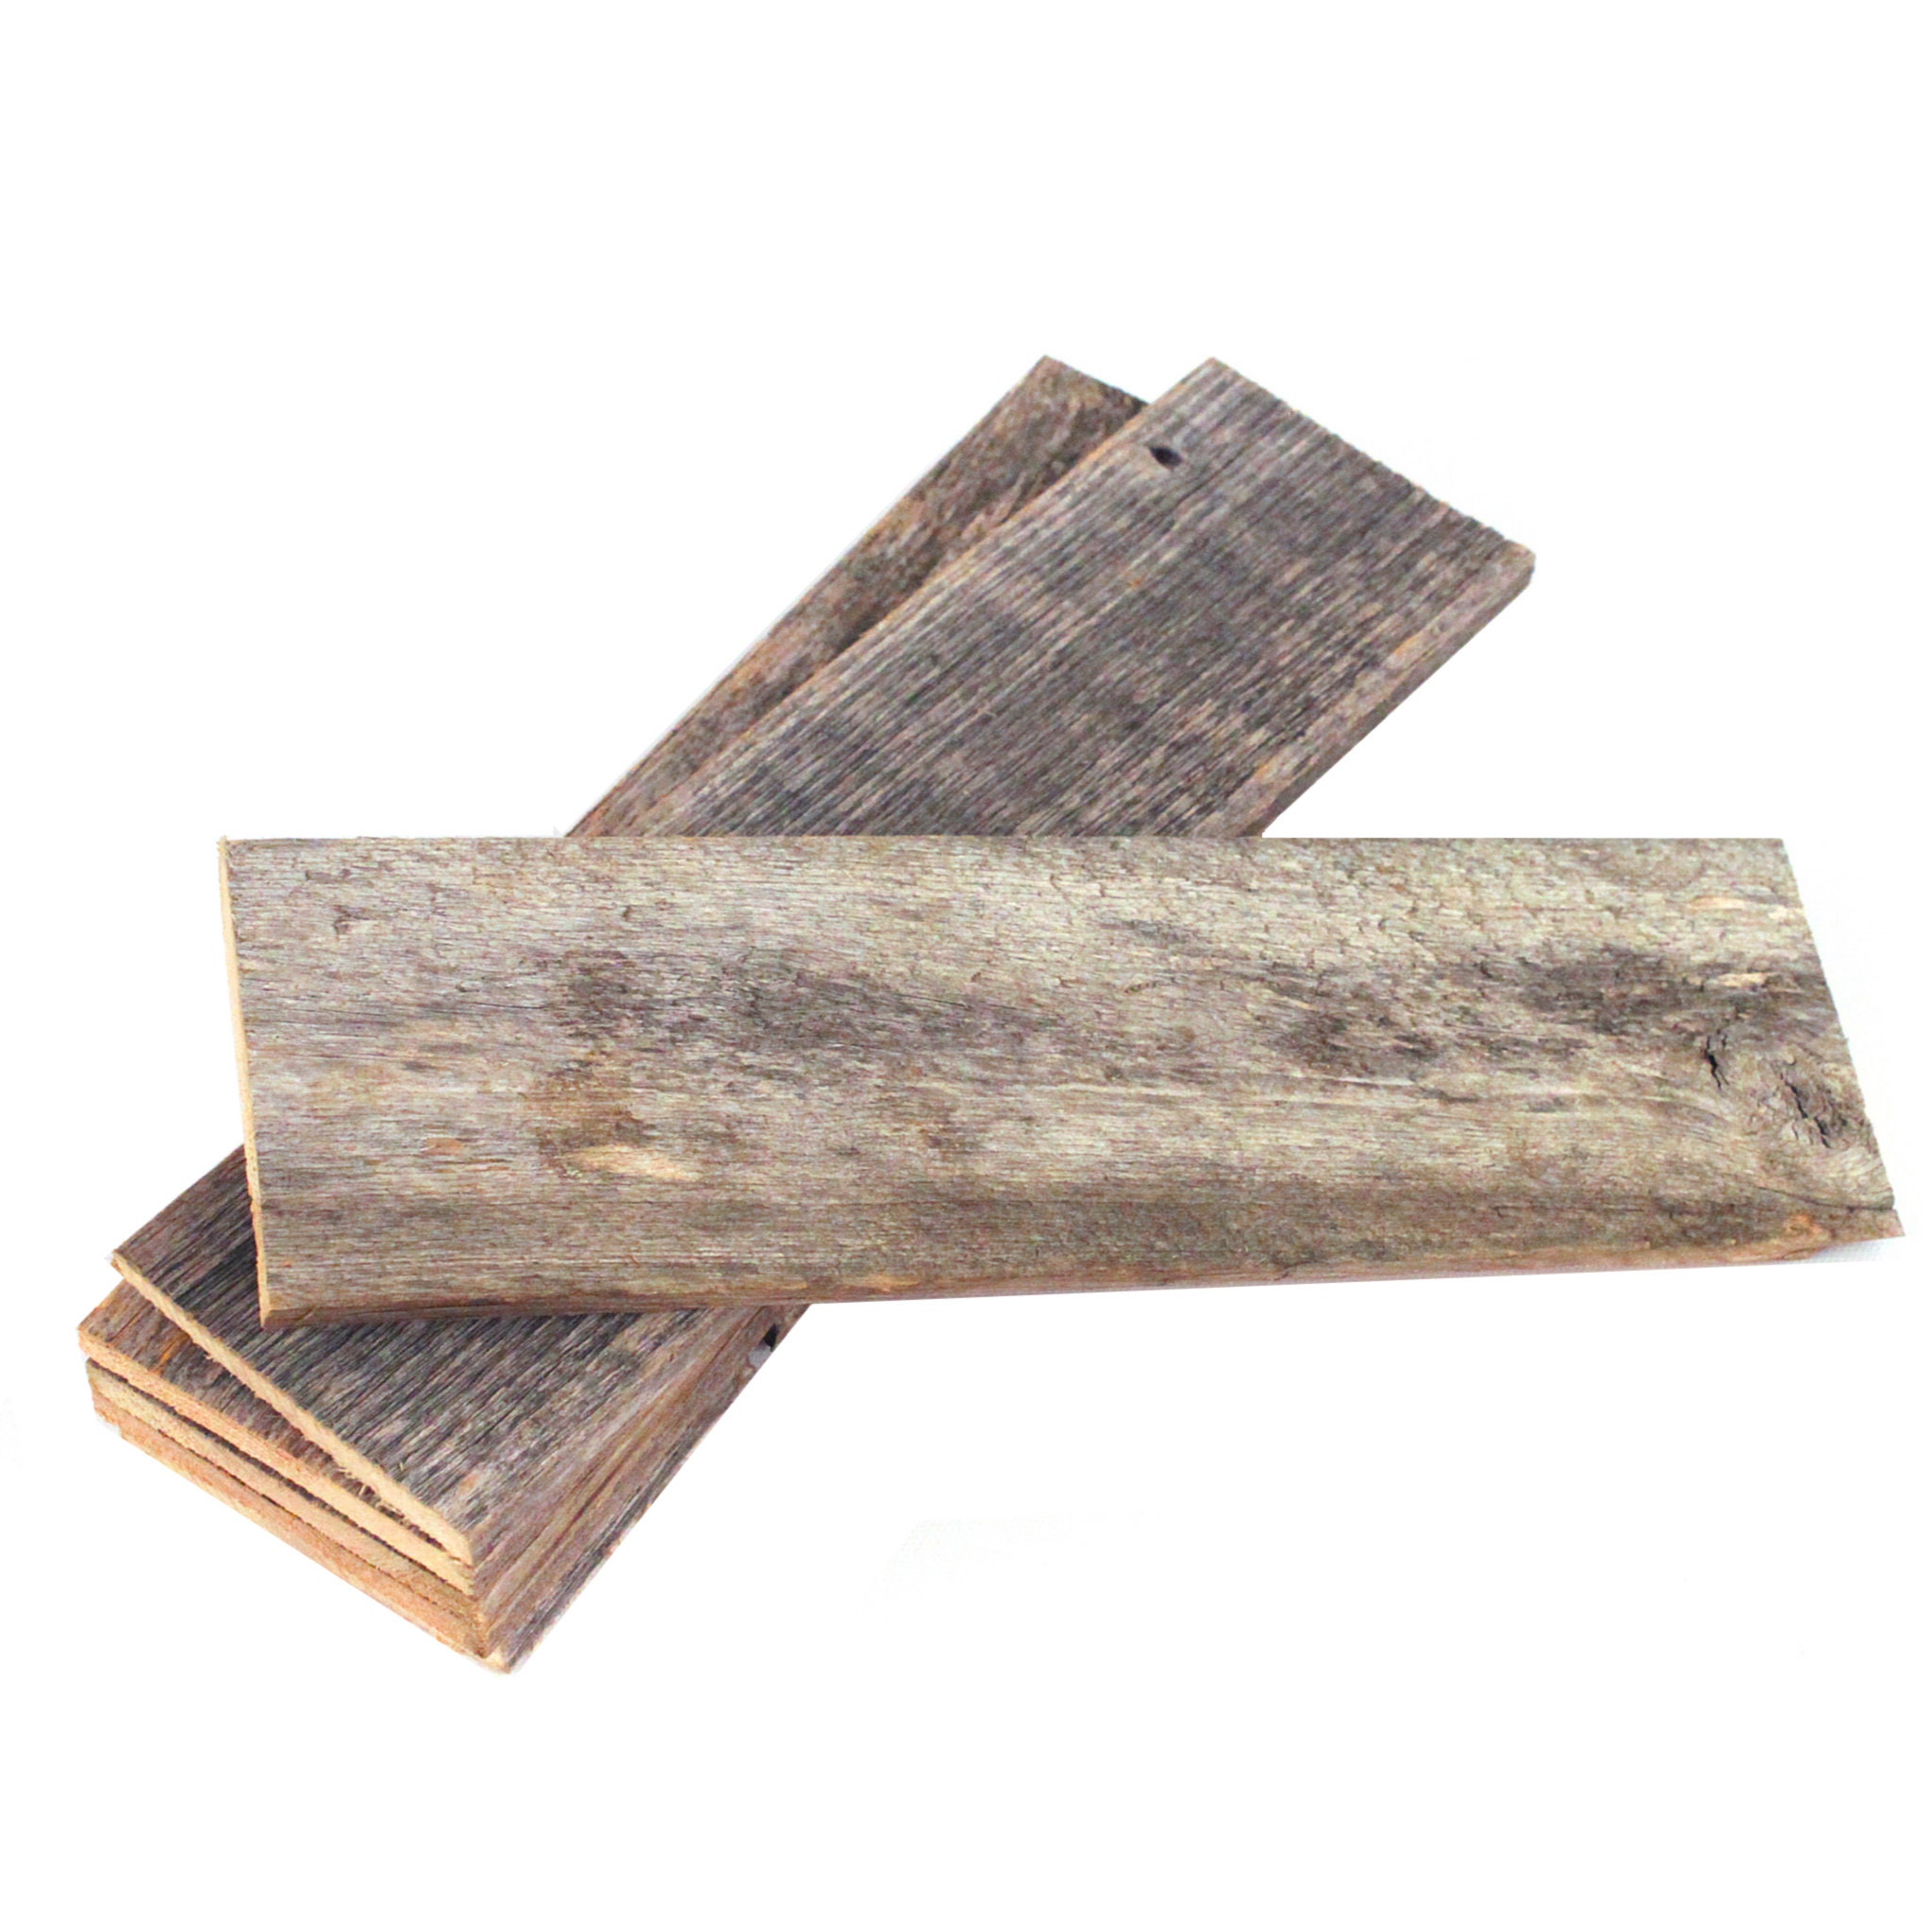 Reclaimed Split Wood Plank Bundle for DIY Projects Craft Wood Pack of 6  0.25 Planks Multiple Lengths Available 